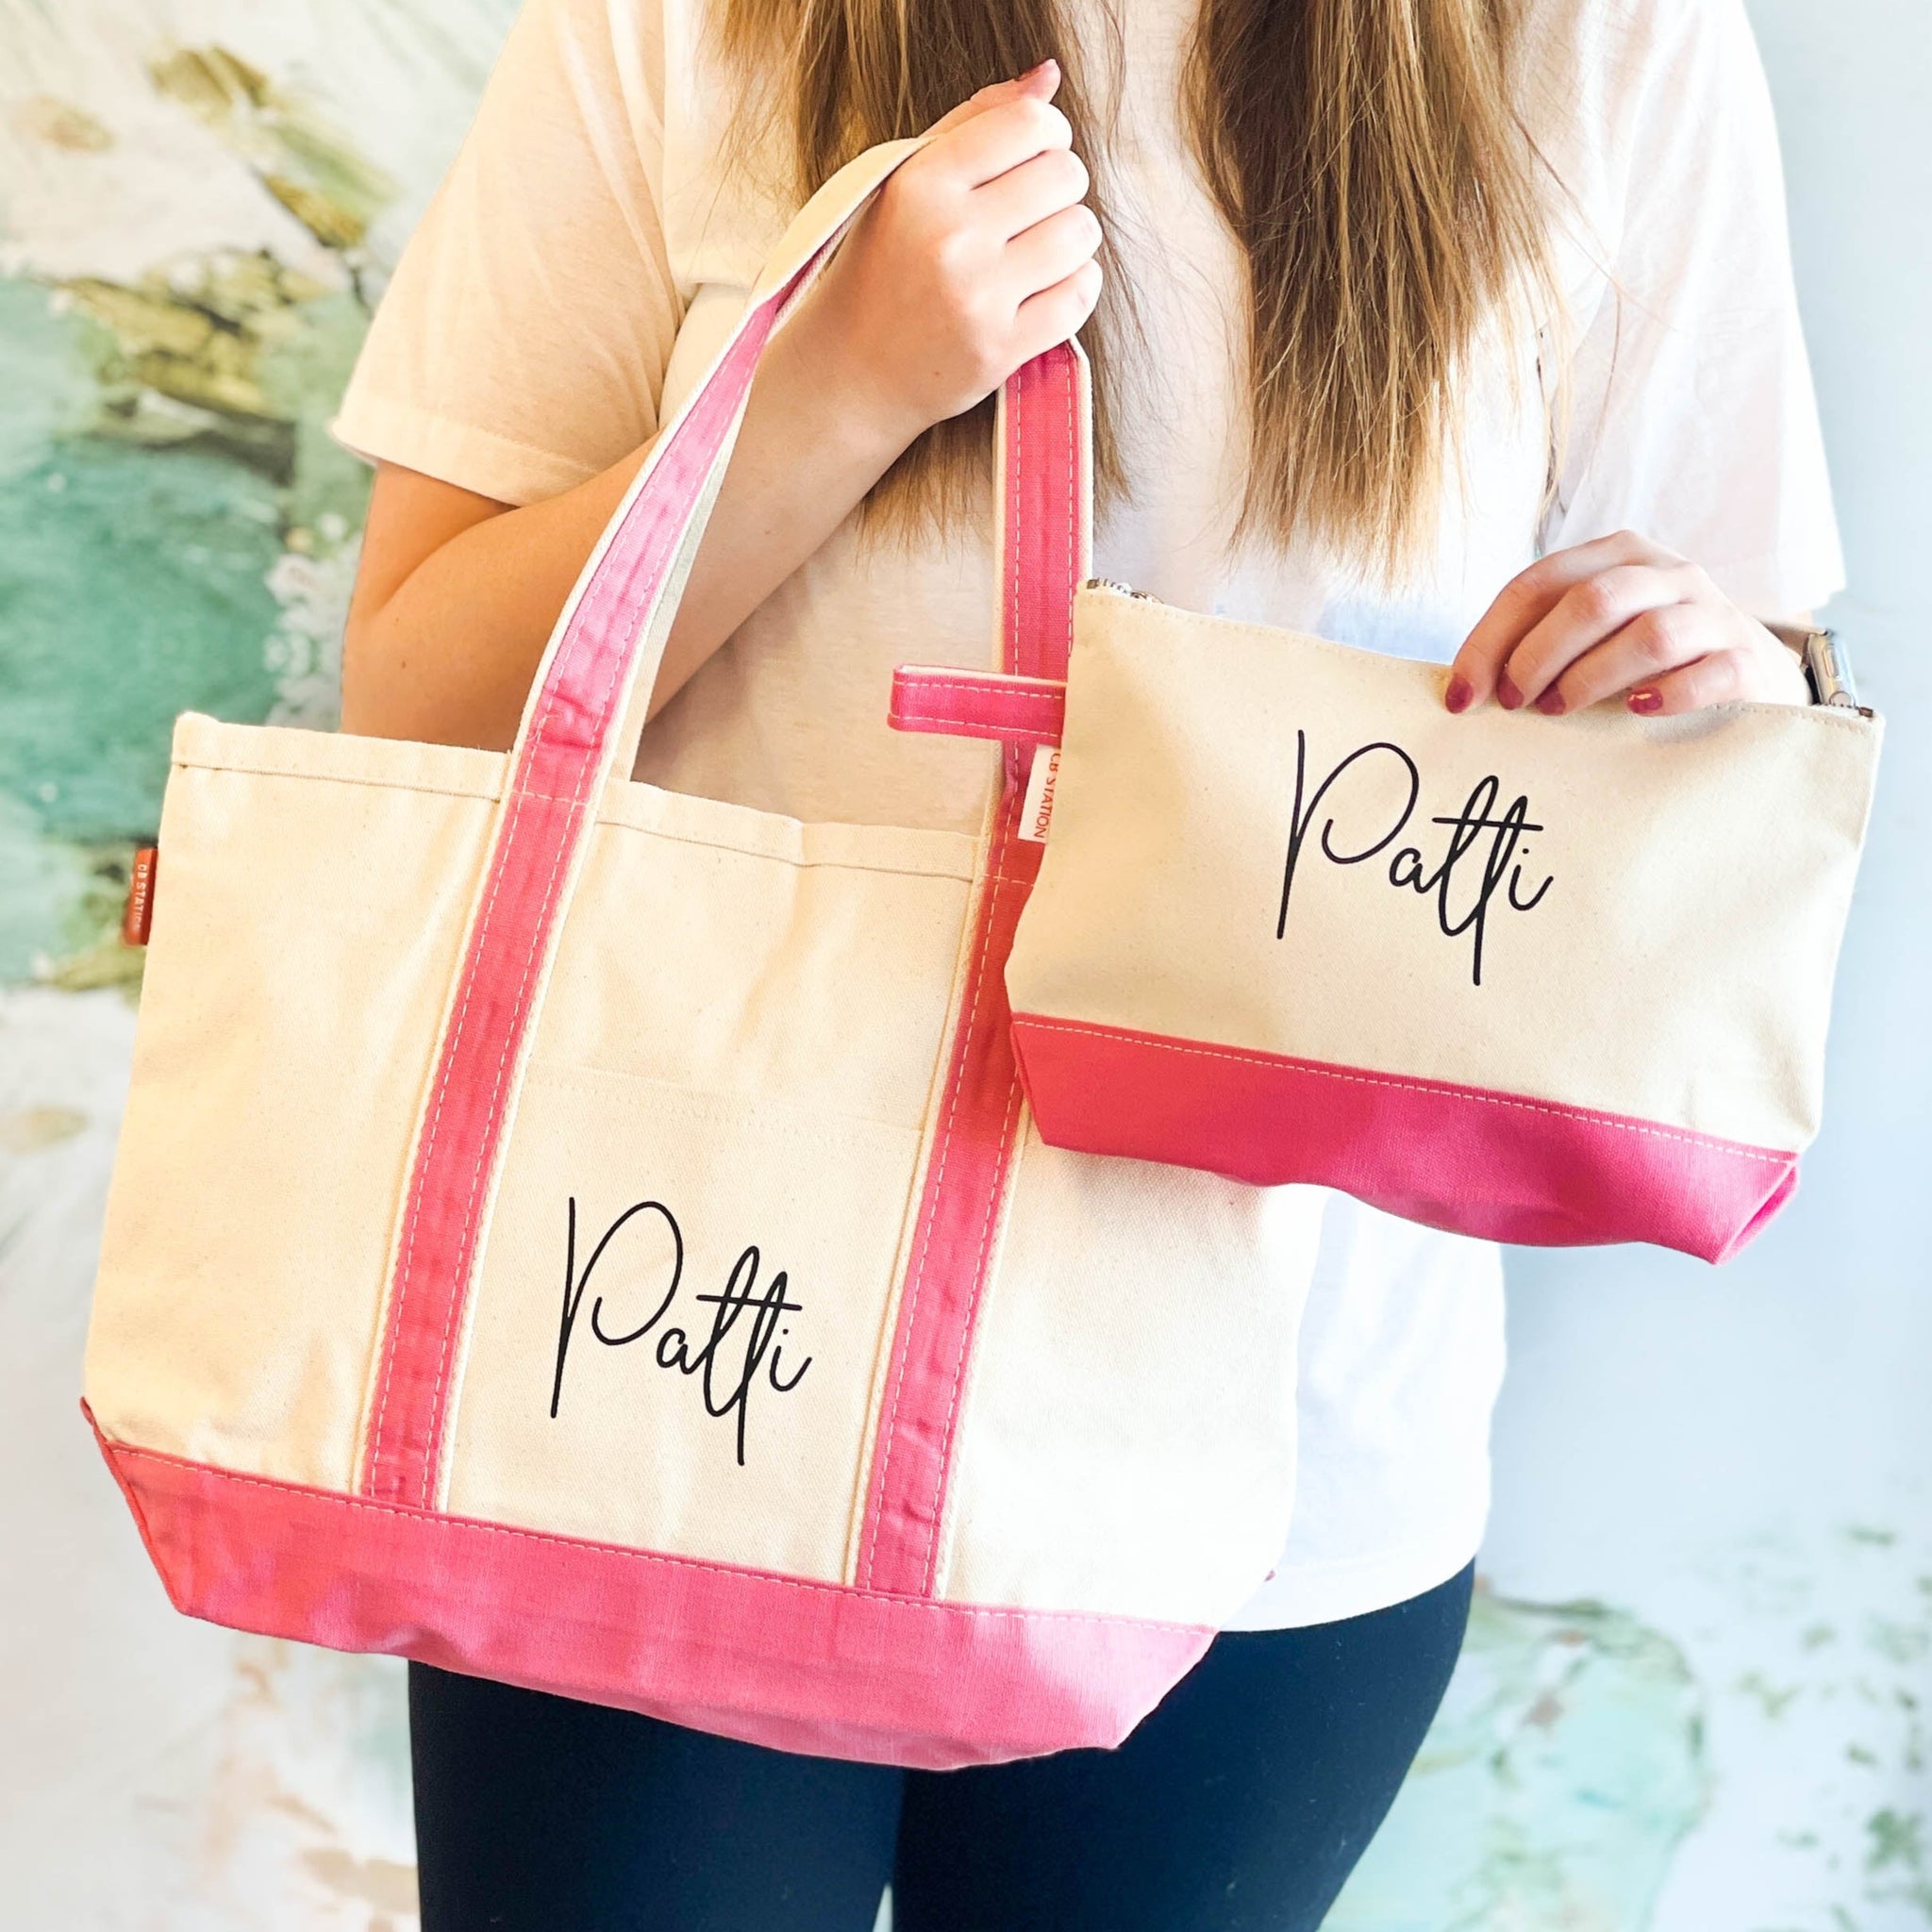 On The Go Tote Bag